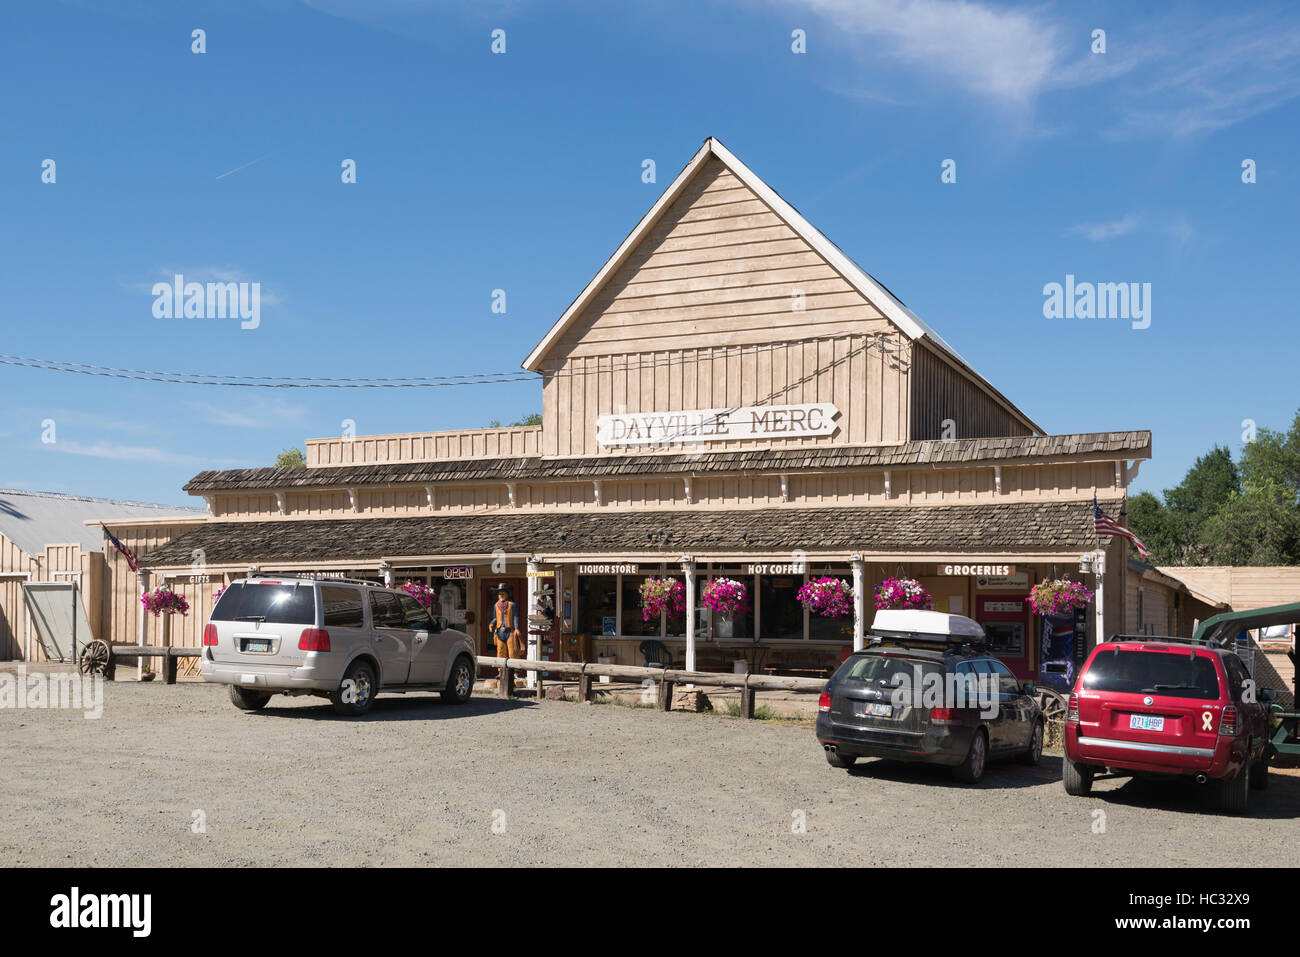 The Dayville Mercantile in the small town of Dayville, Oregon. Stock Photo